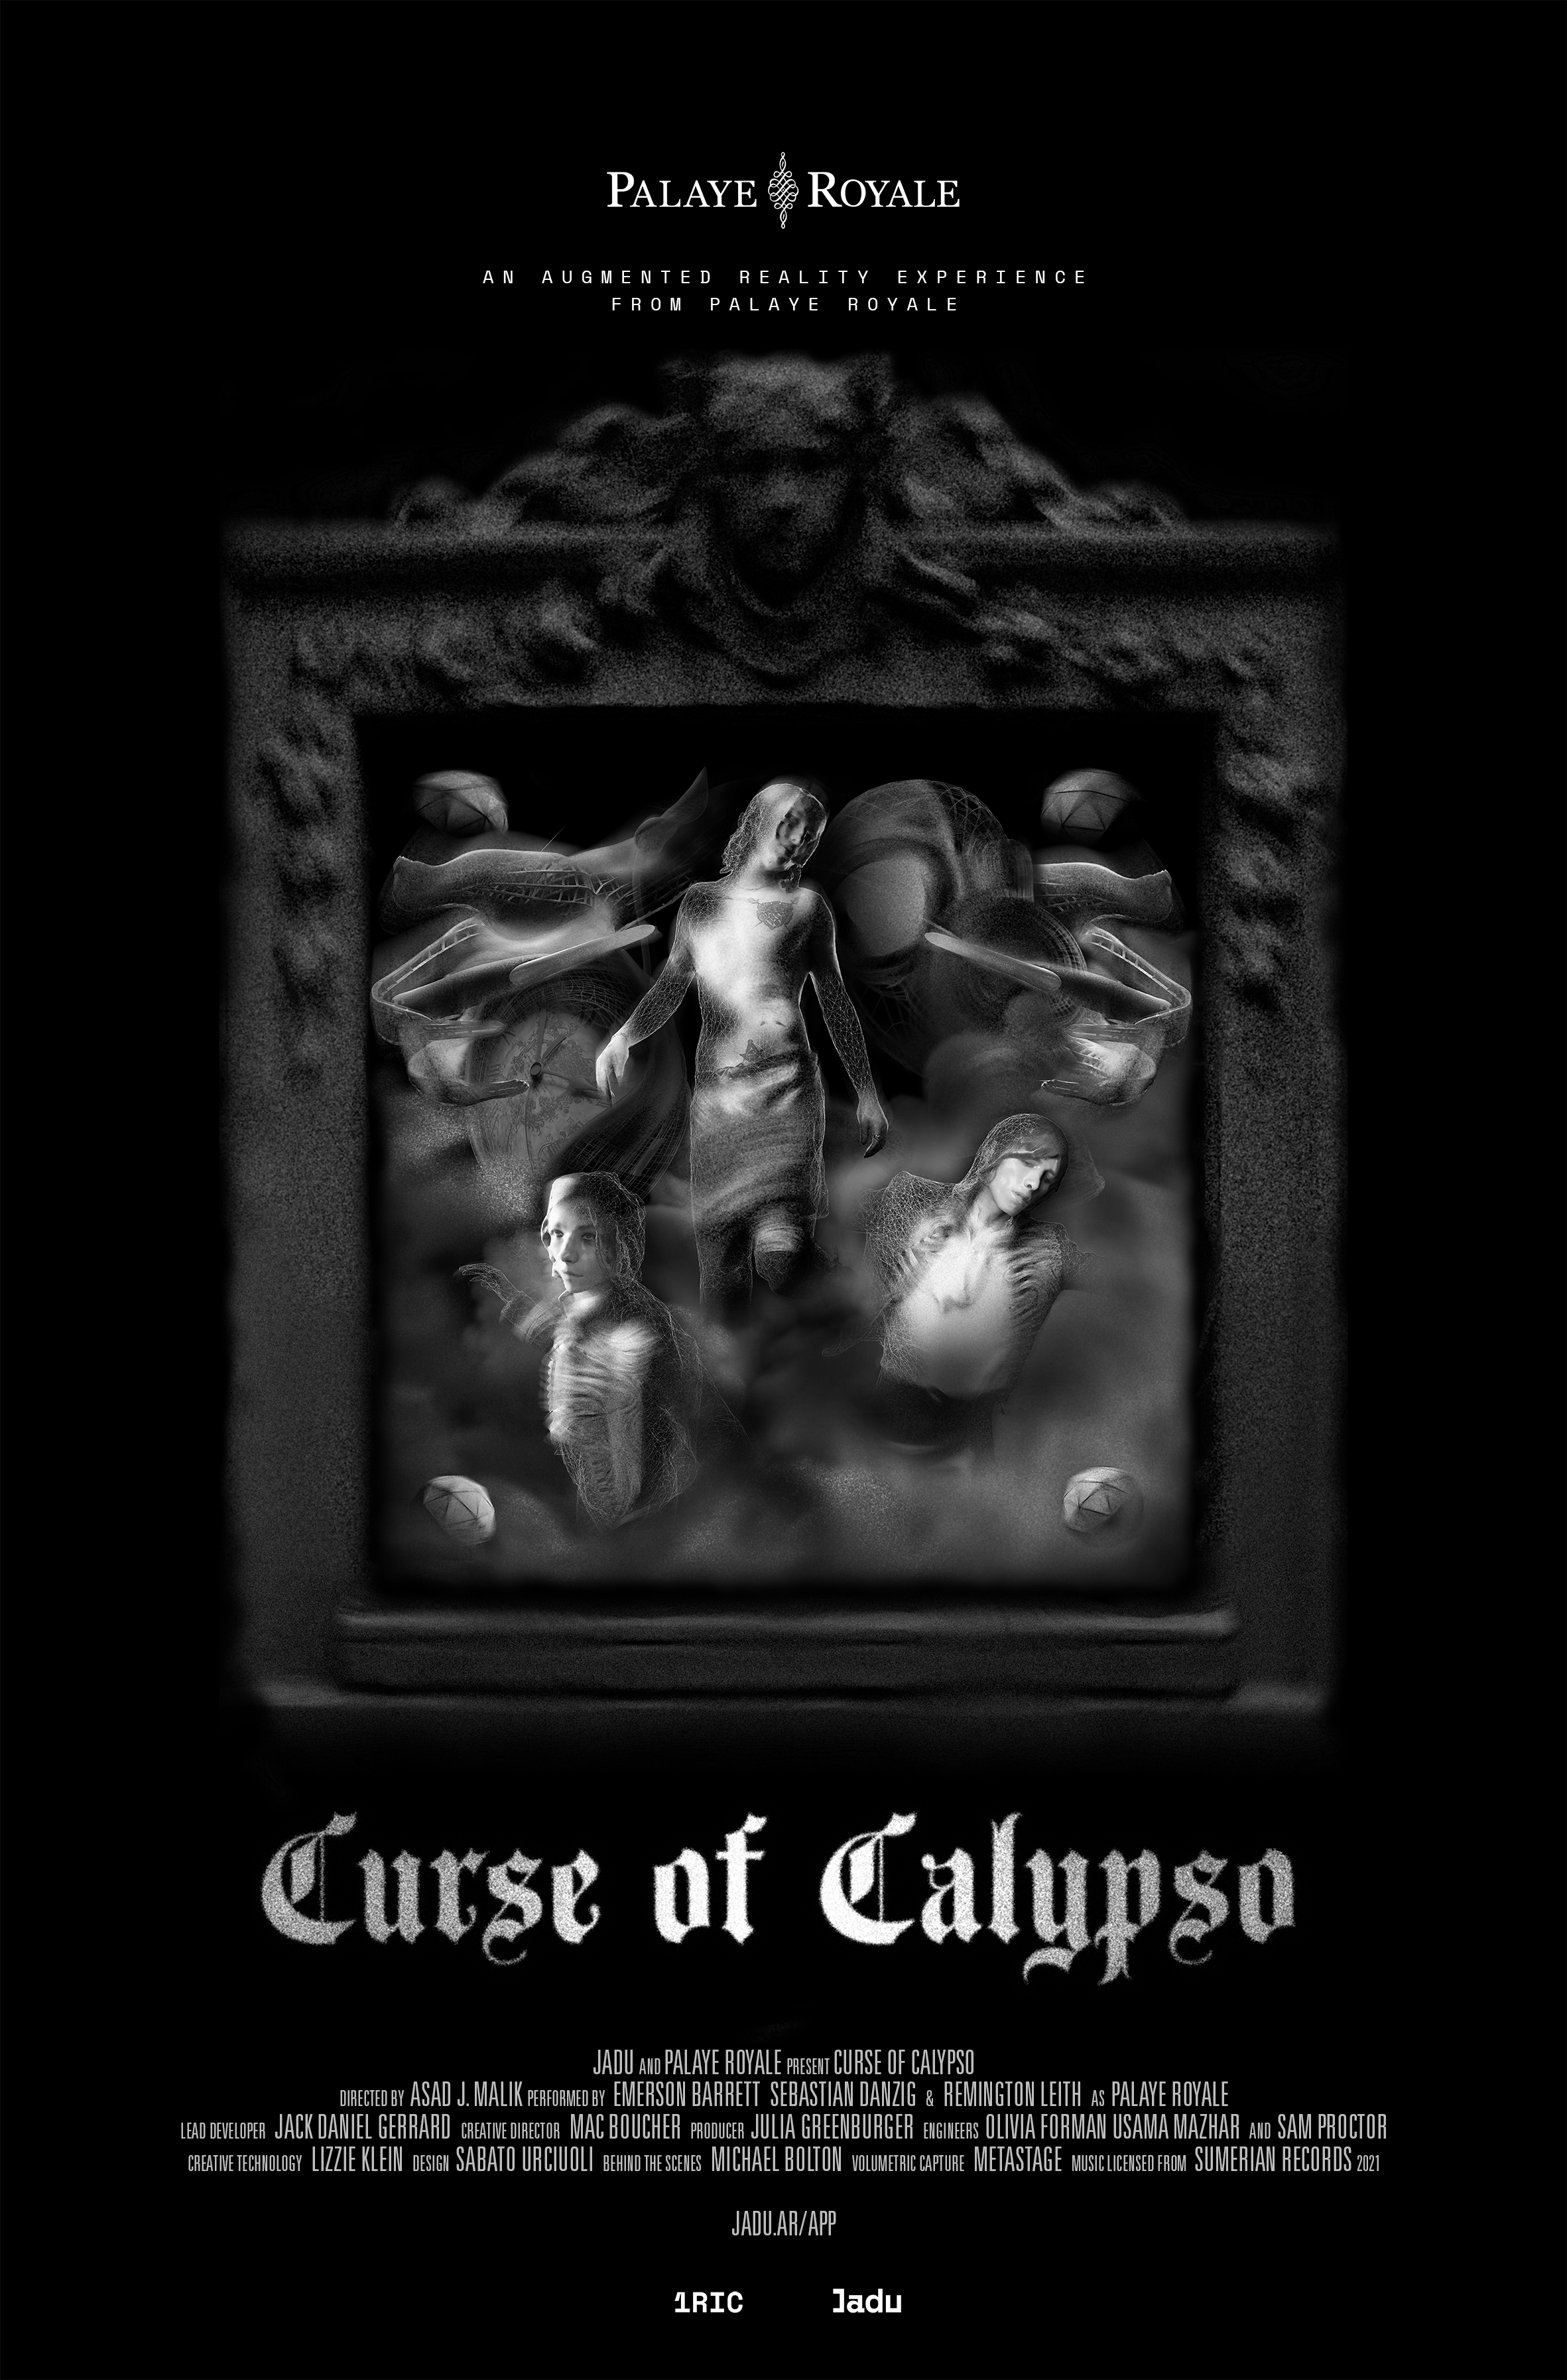 Palaye Royale Announce New Augmented Reality Experience, <i>Curse of Calypso</i>” title=”Curse_of_Calypso_Poster” data-original-id=”366492″ data-adjusted-id=”366492″ class=”sm_size_full_width sm_alignment_center ” data-image-use=”multiple_use” /></p>
<p>Last summer, Palaye Royale joined SPIN’s Untitled Twitch Stream to chat with fans, play some acoustic tunes, and show off their cooking skills before <a href=